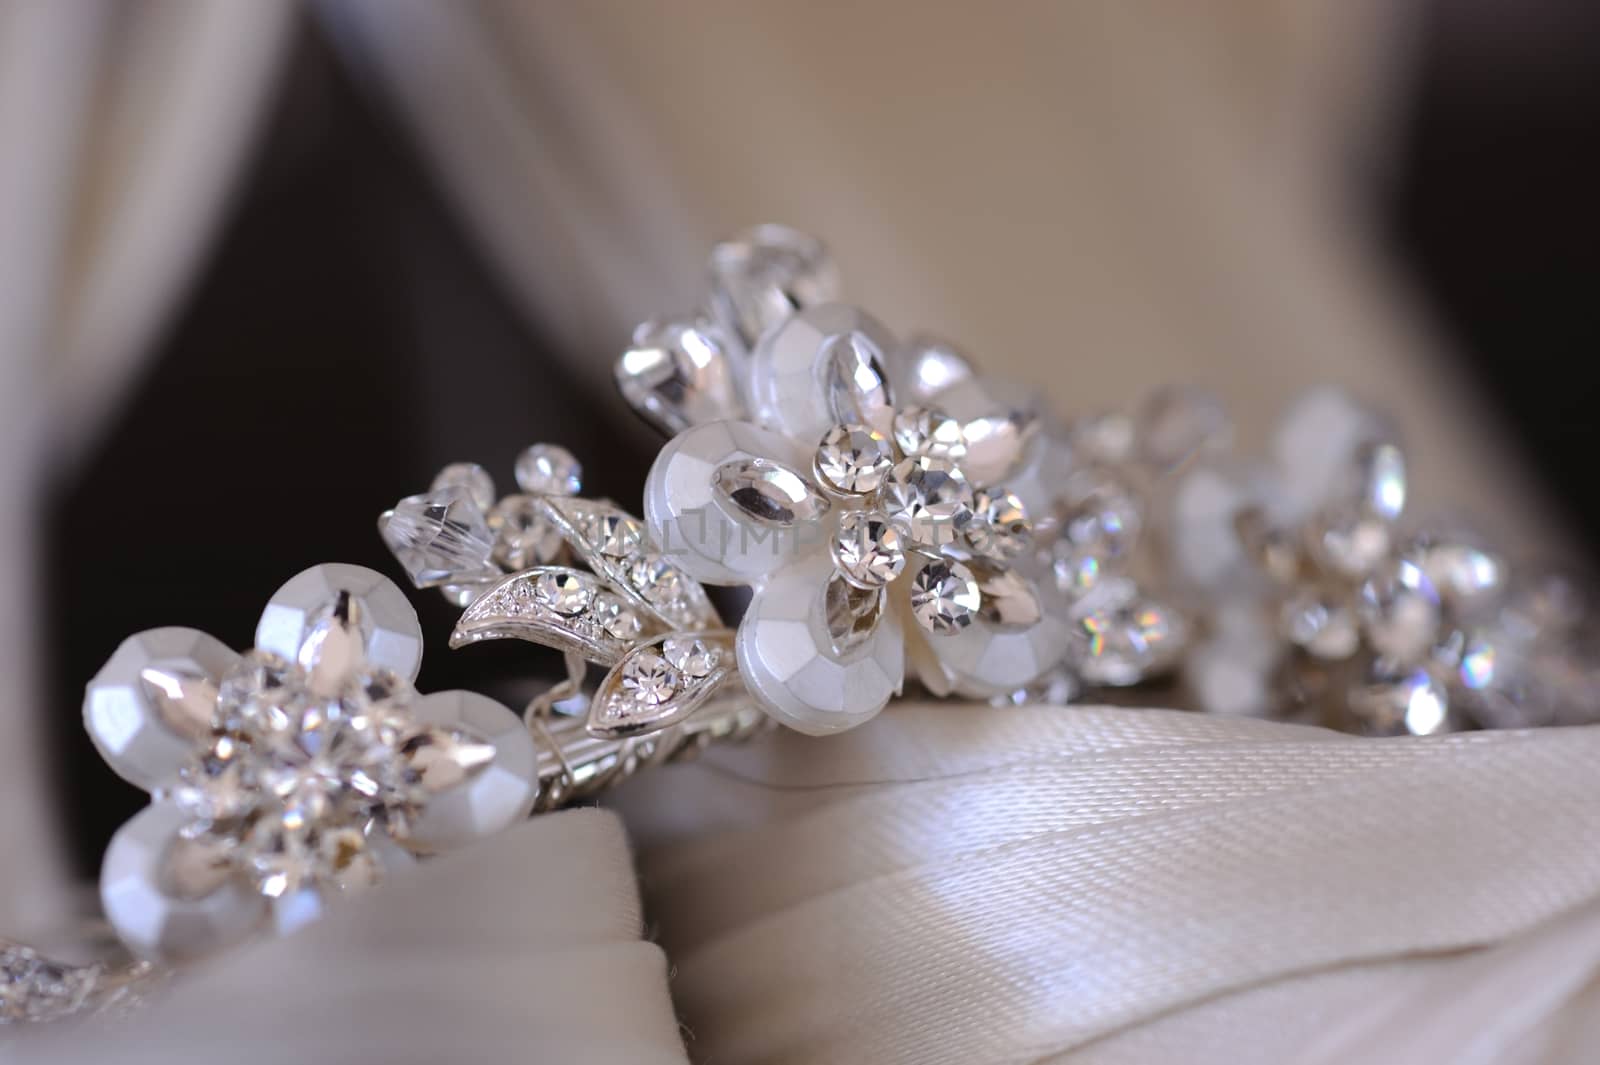 Close up of brides tiara resting on her shoes.